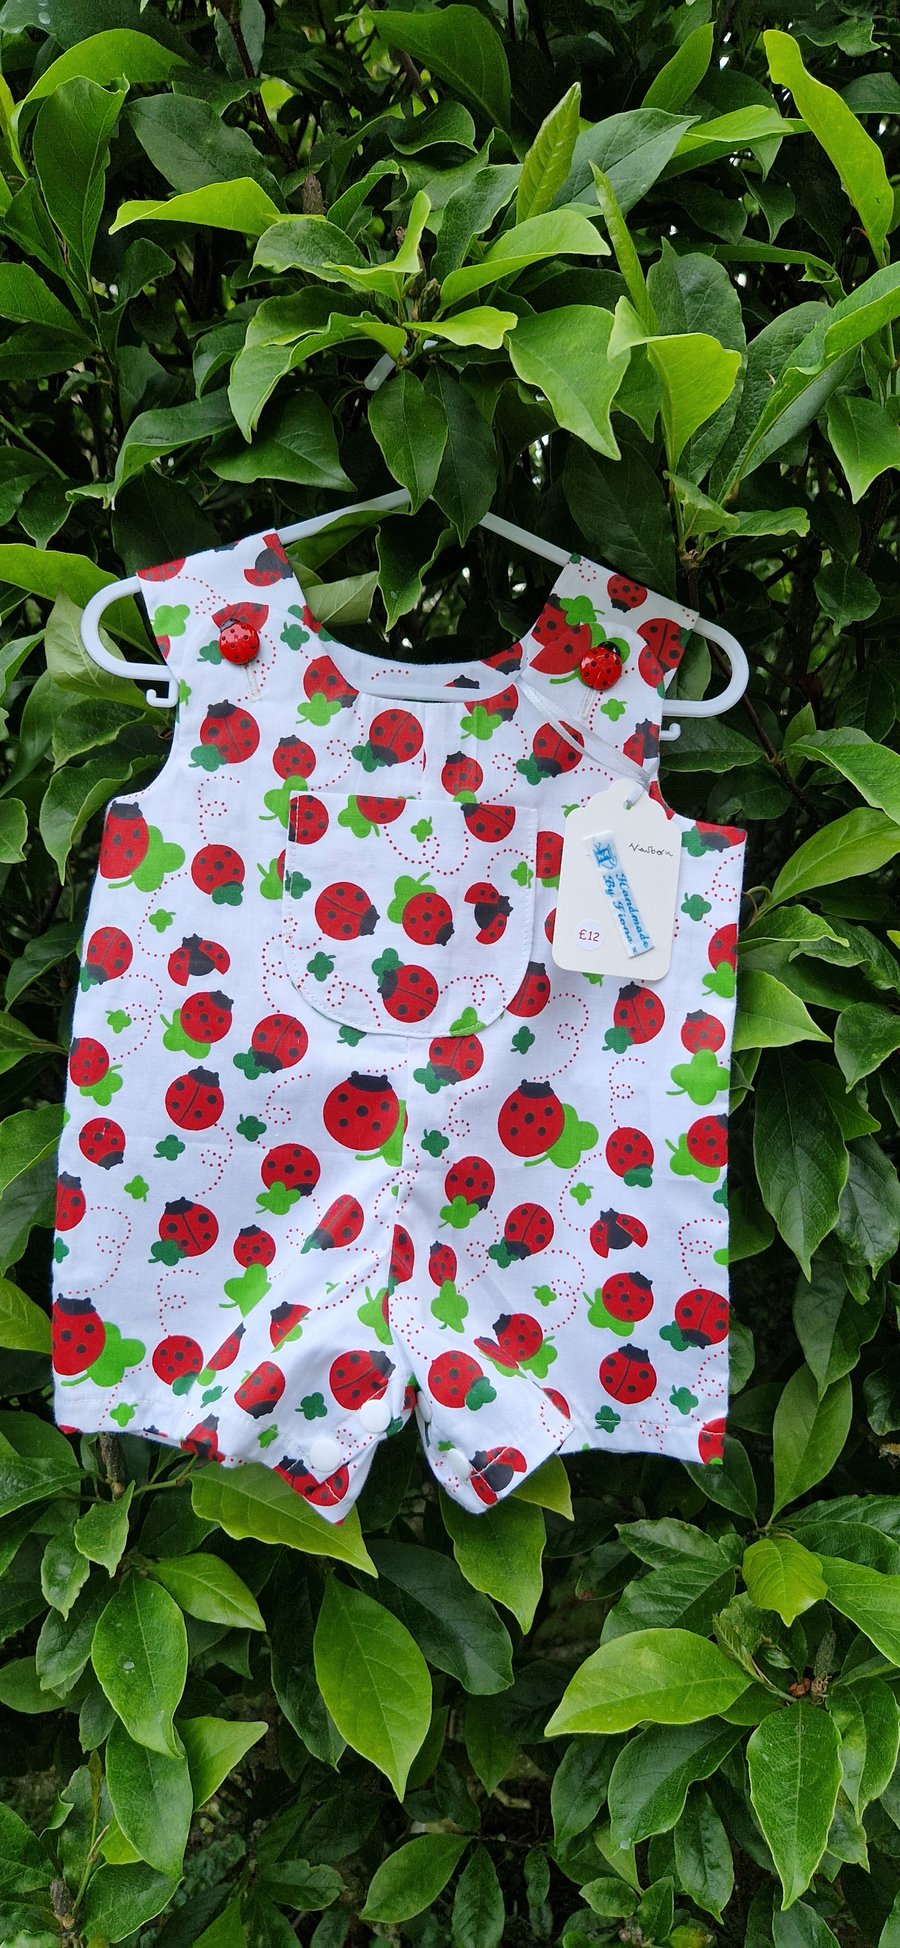 Age: Newborn - Ladybird and Clover Leaf Rompers